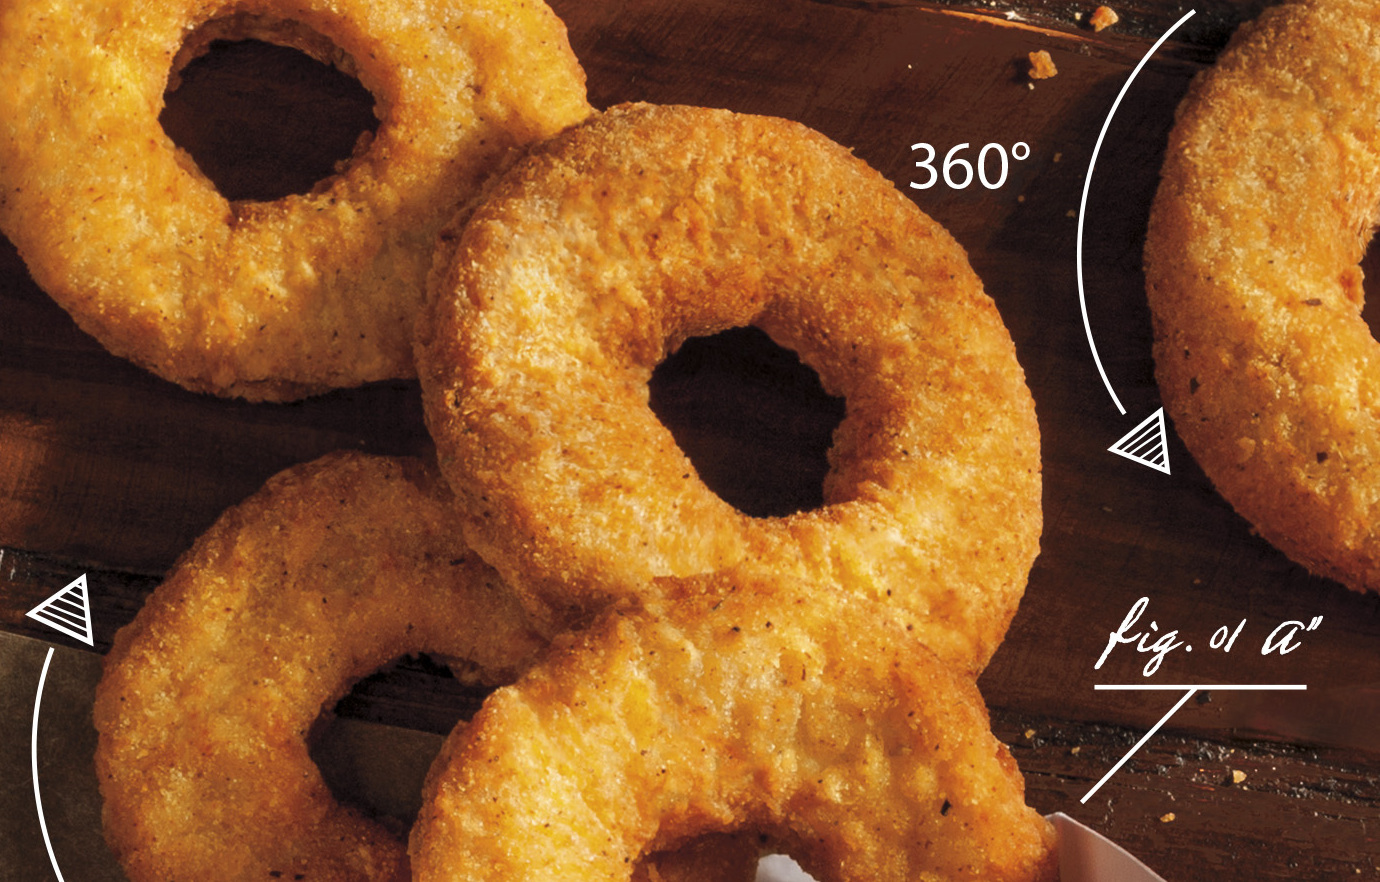 Burger King Will Sell Chicken Fries In Ring Form